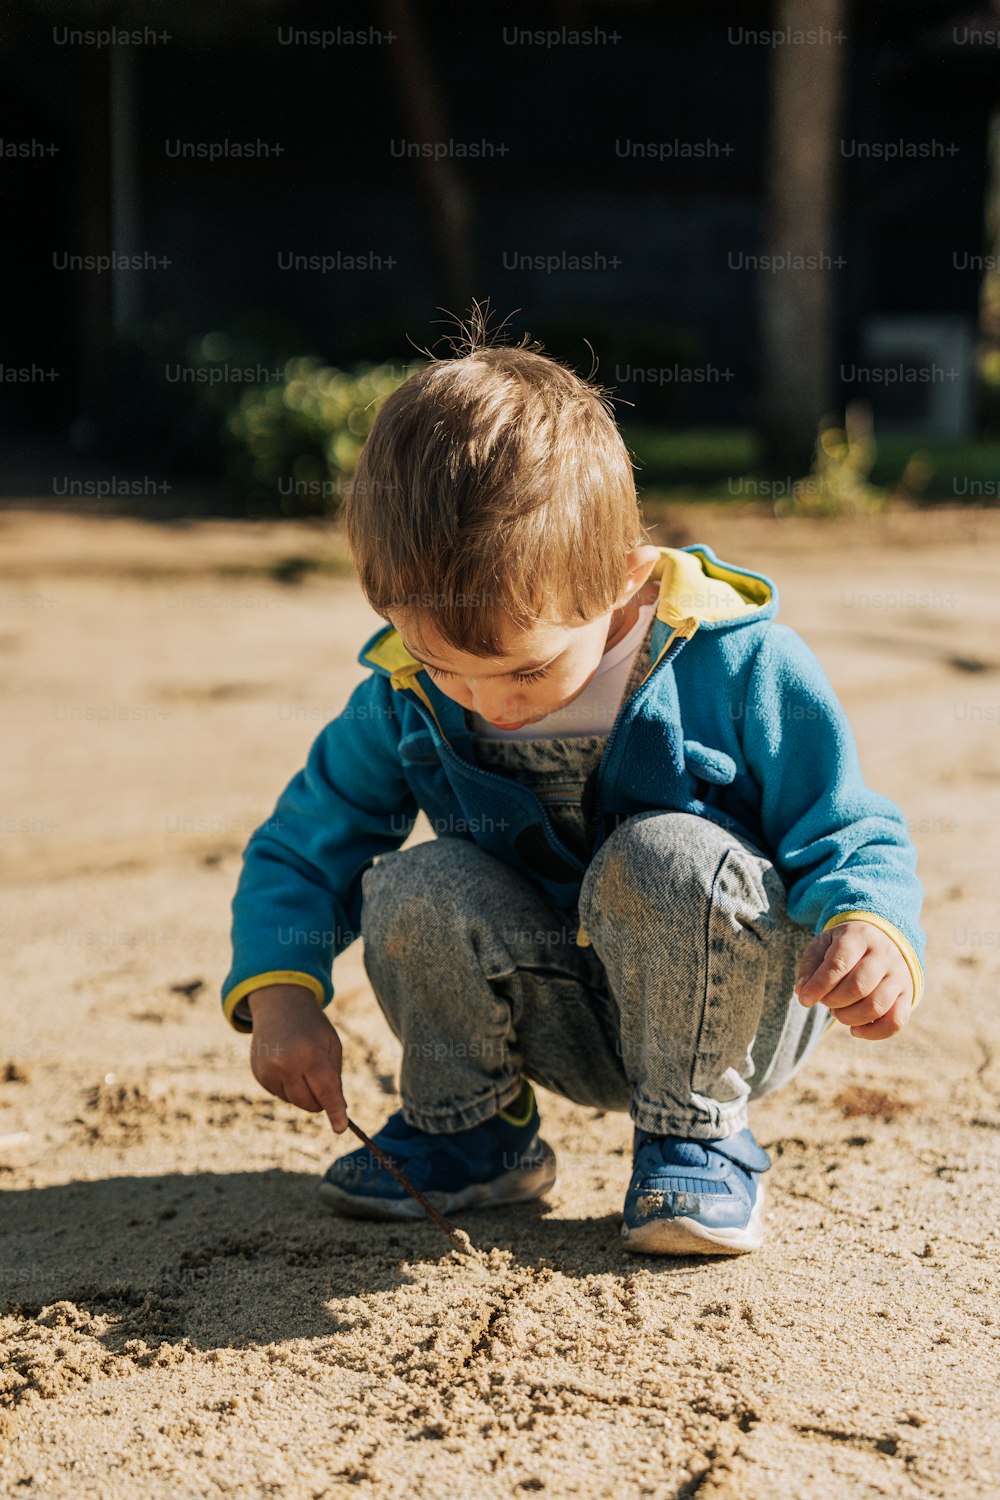 a small child in a blue jacket playing in the sand